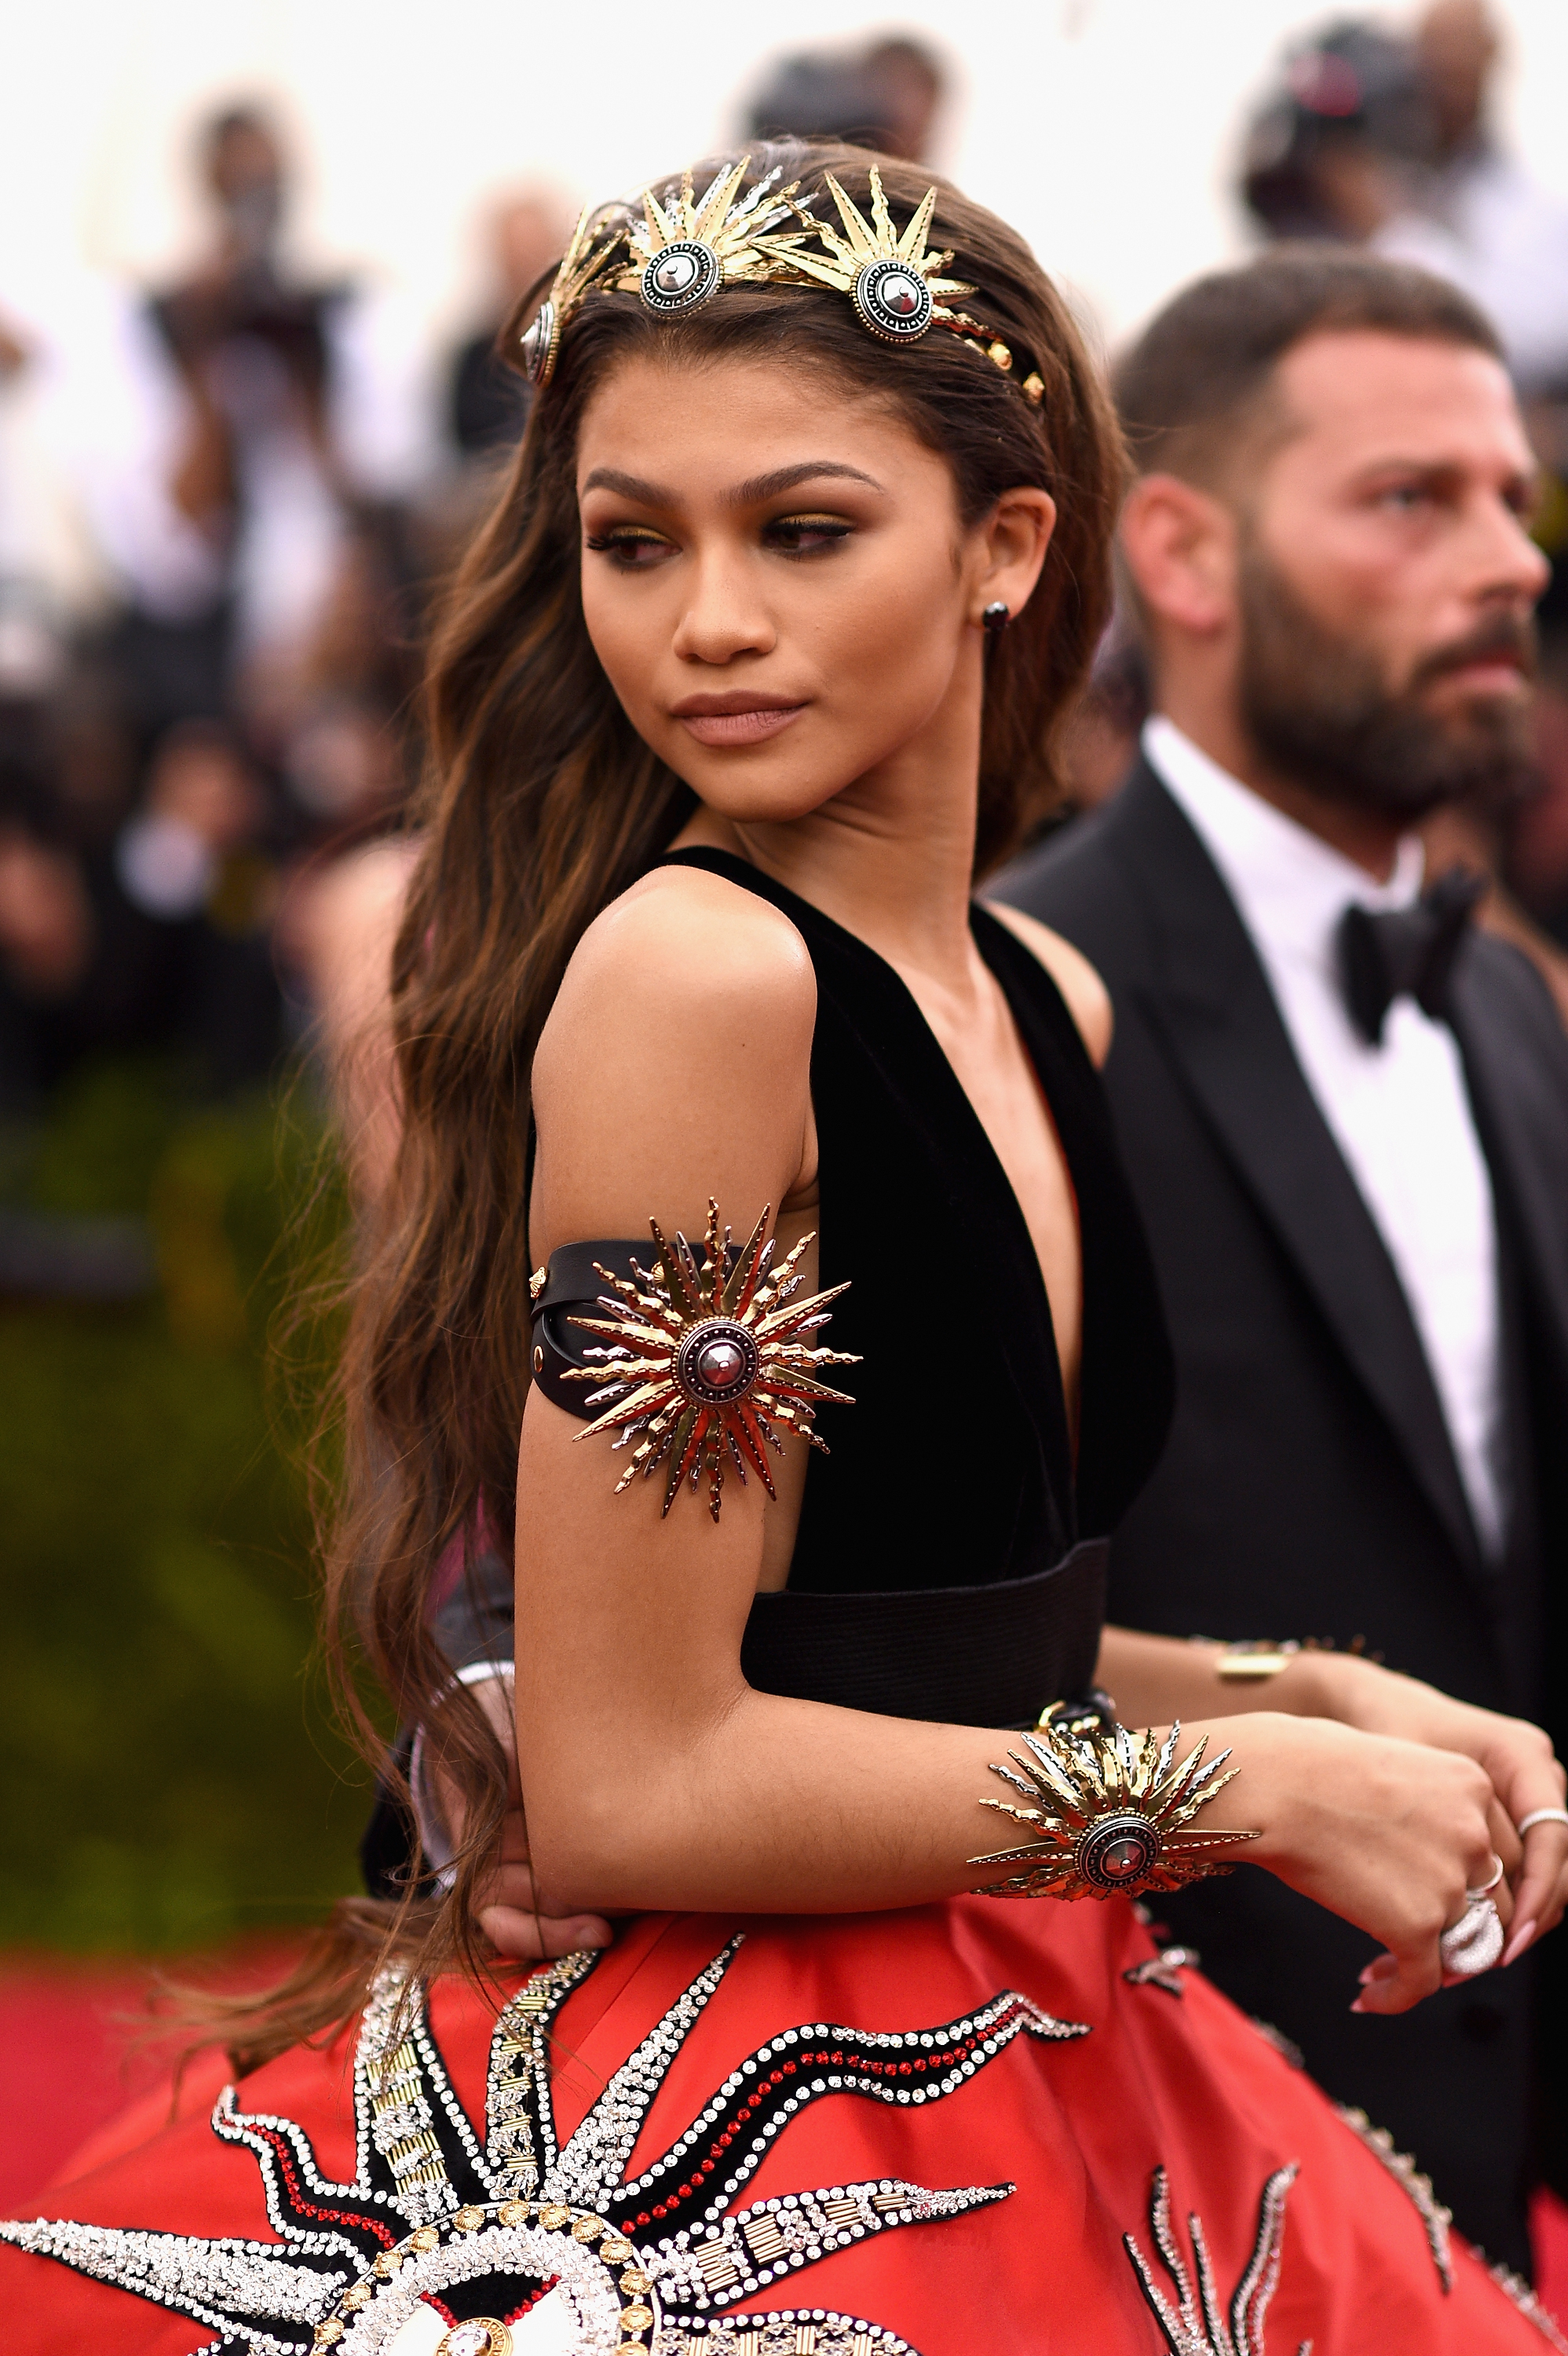 Zendaya in a two-toned dress with star embellishments and a matching headpiece